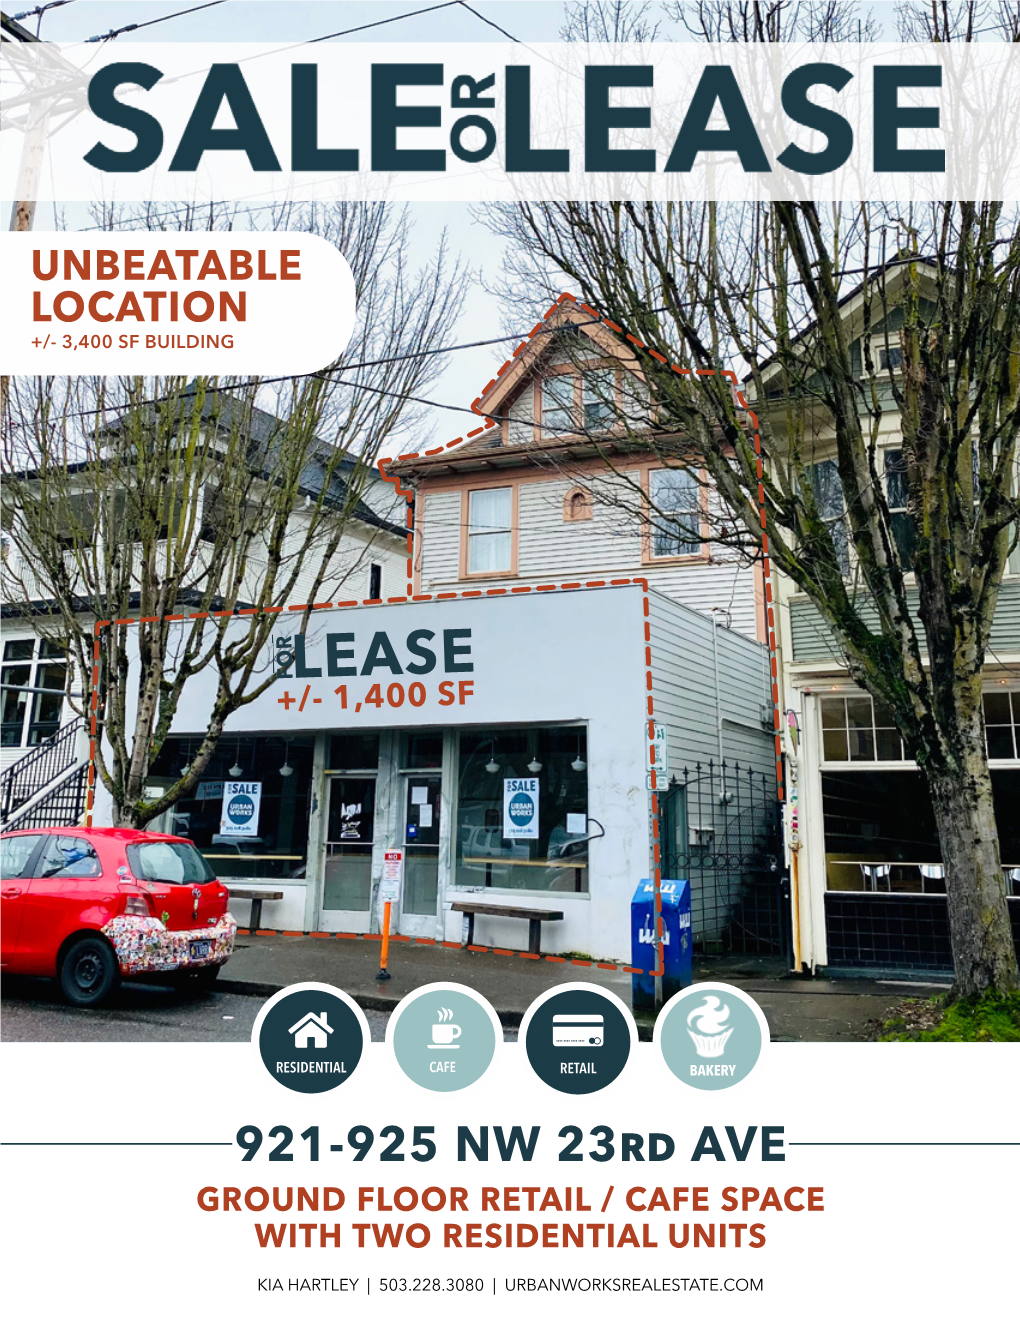 921-925 NW 23Rd AVE GROUND FLOOR RETAIL / CAFE SPACE with TWO RESIDENTIAL UNITS